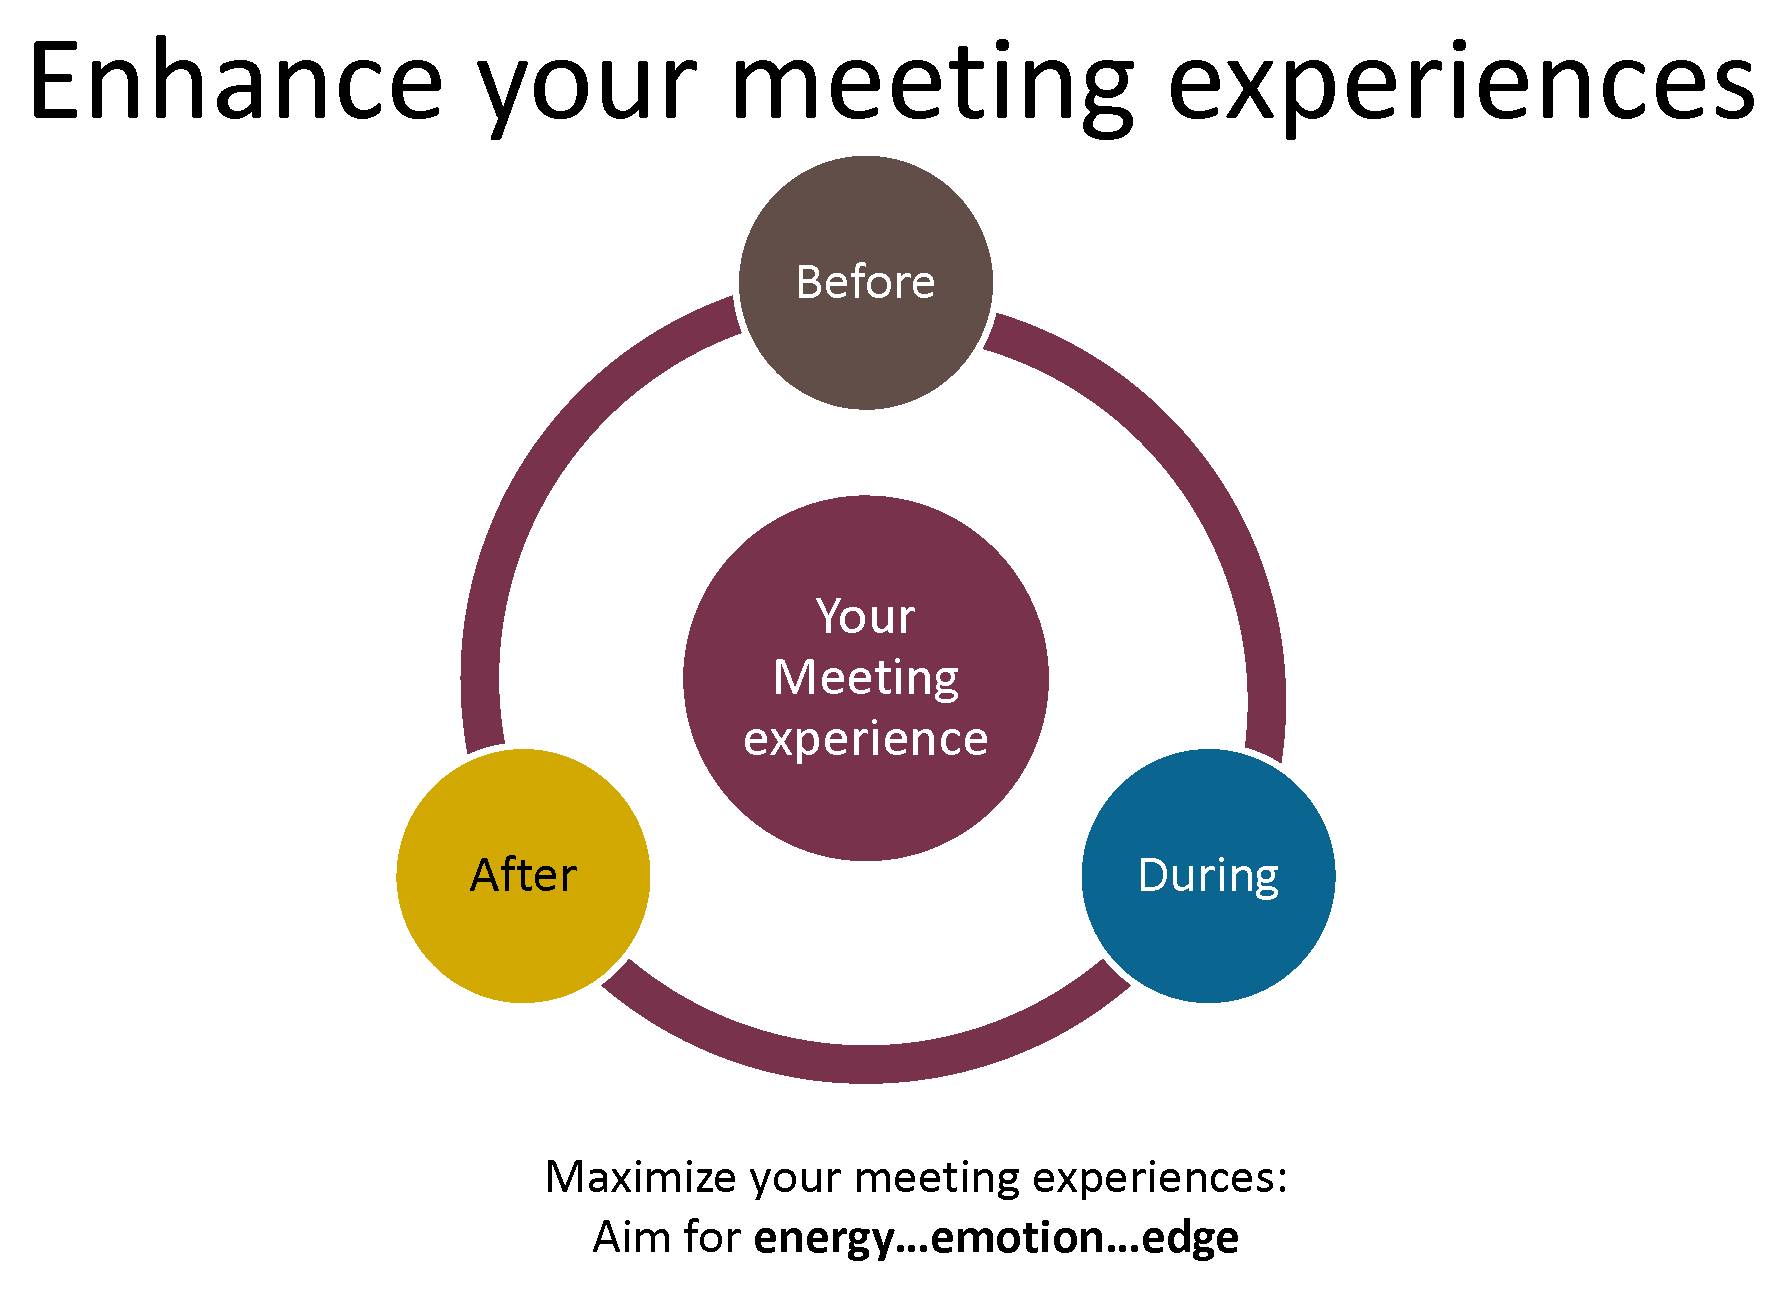 How to create energy, emotion, and edge in your meetings